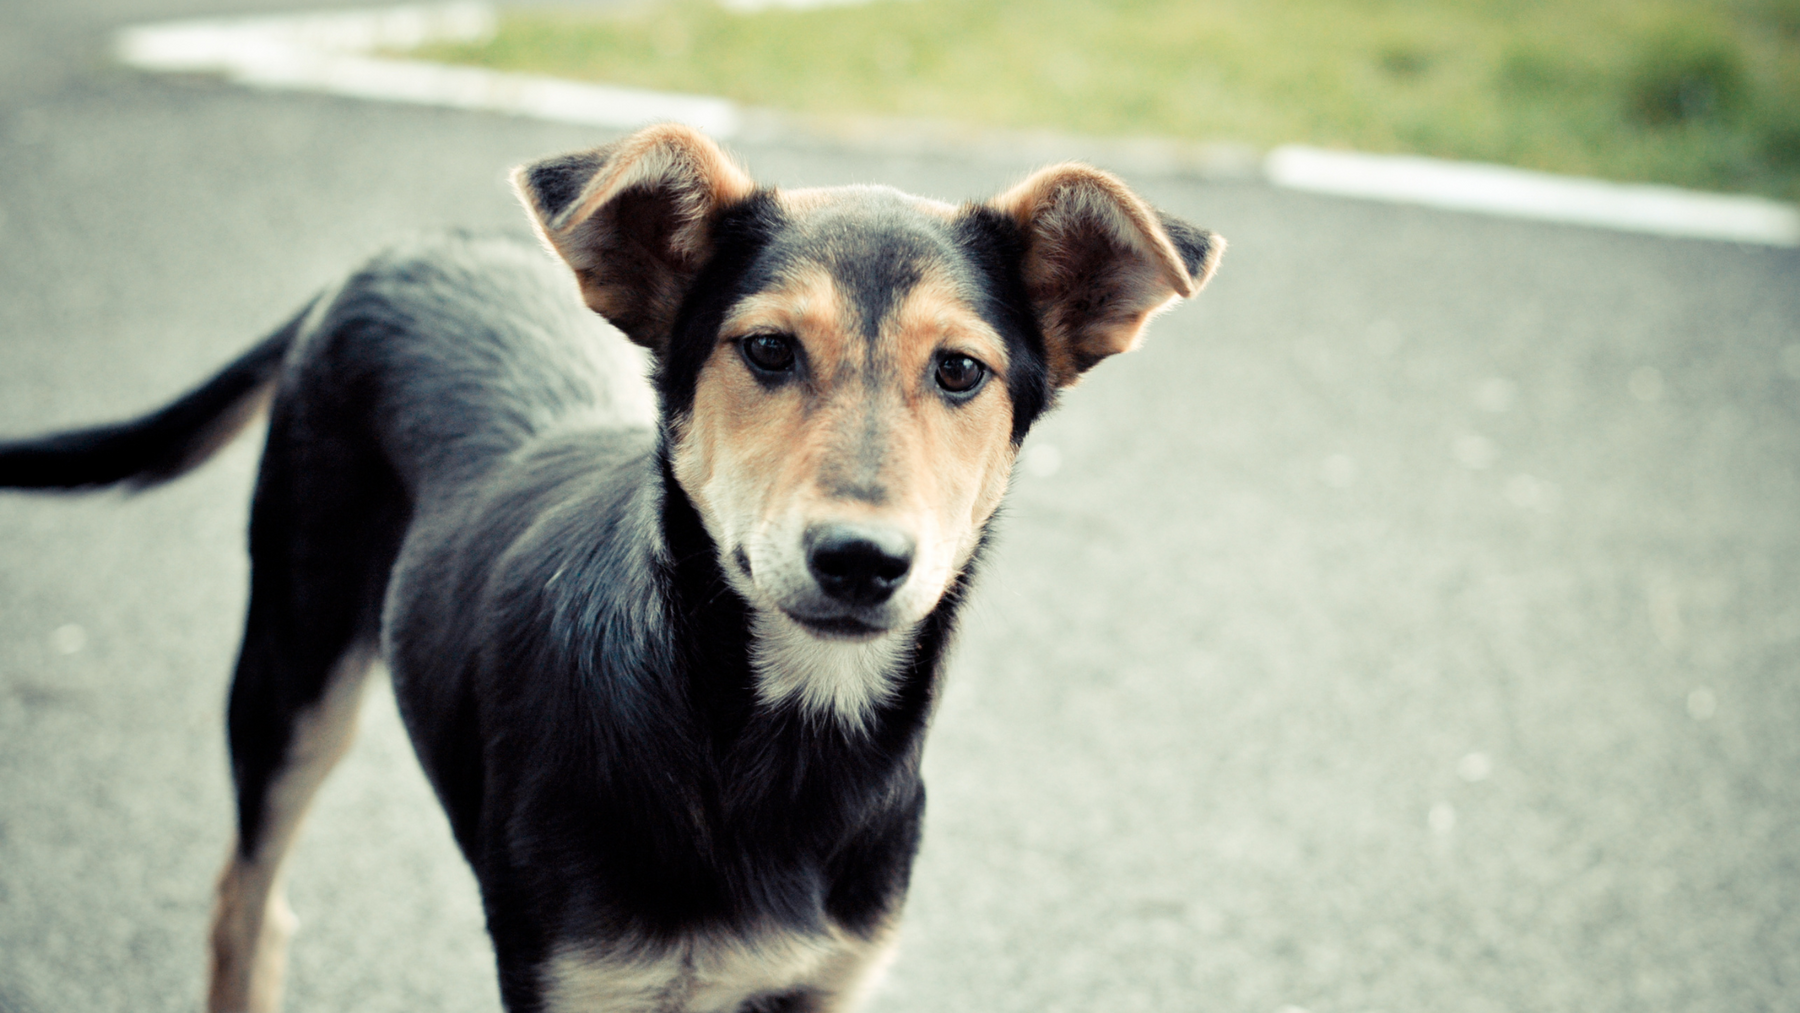 7 Essential Steps: What to Do When You See a Stray Dog